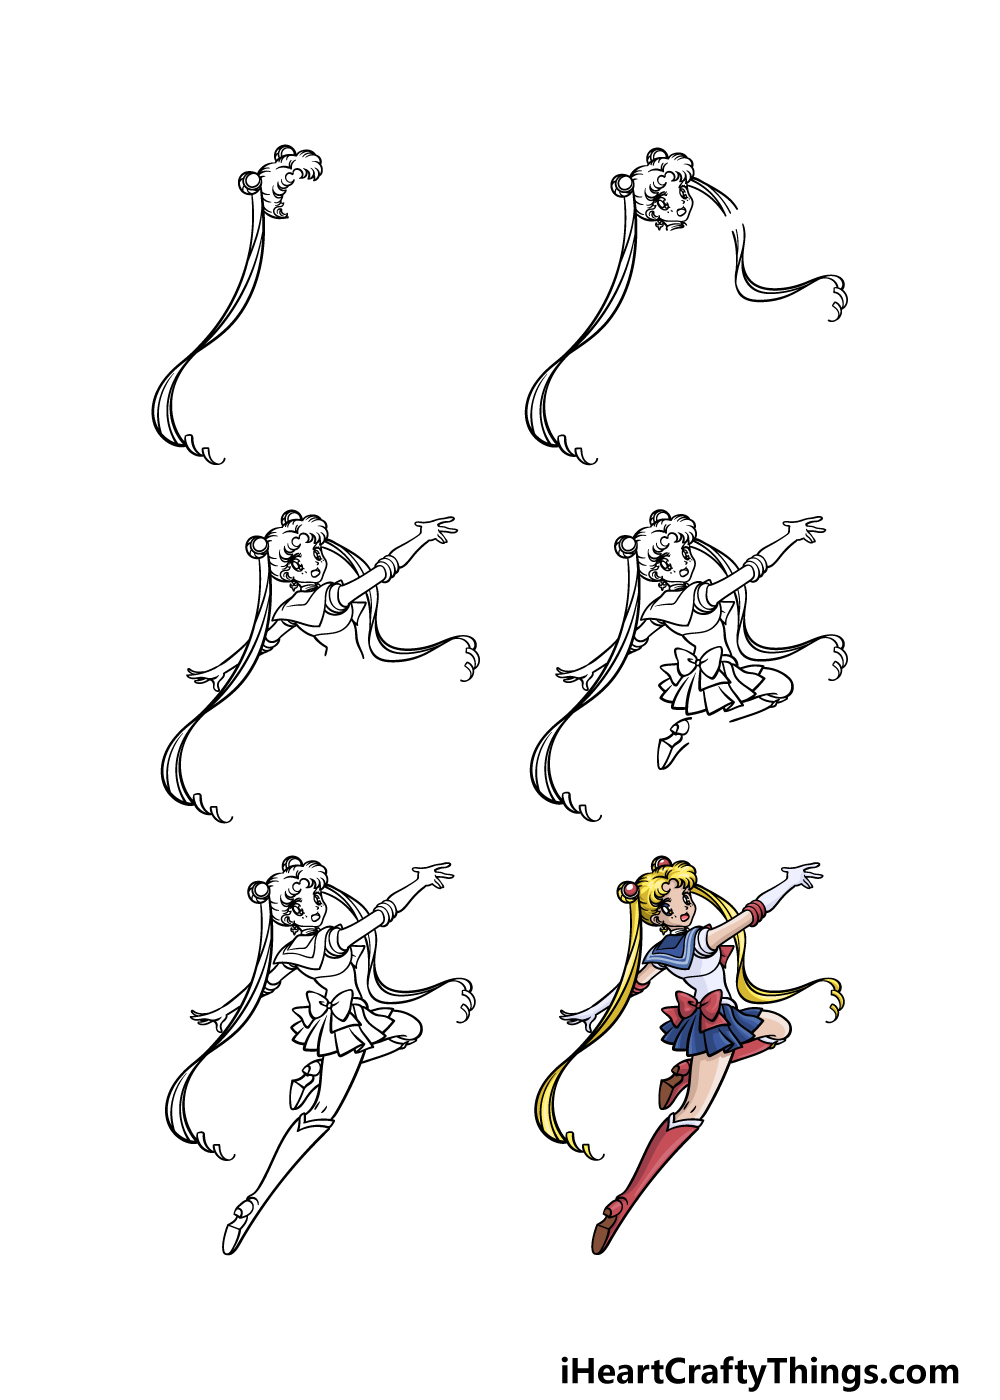 How To Draw Sailor Moon in 6 steps